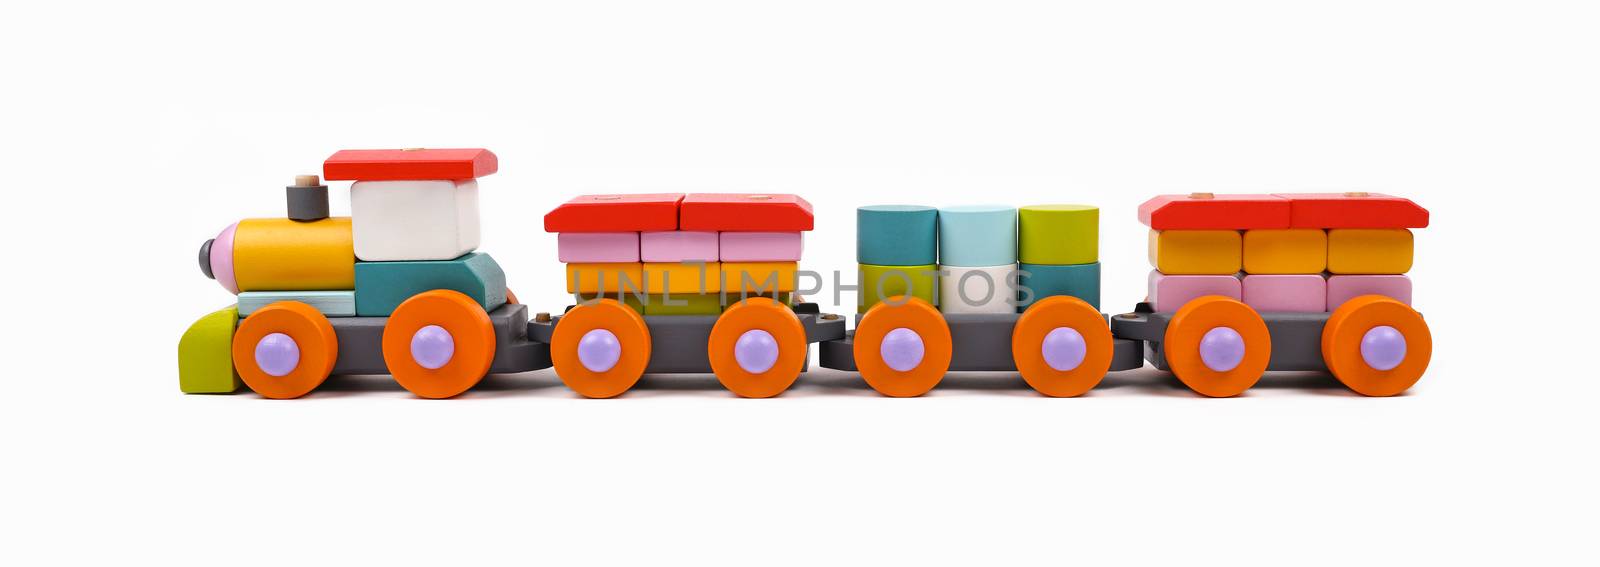 Wooden painted toy train isolated on white by BreakingTheWalls